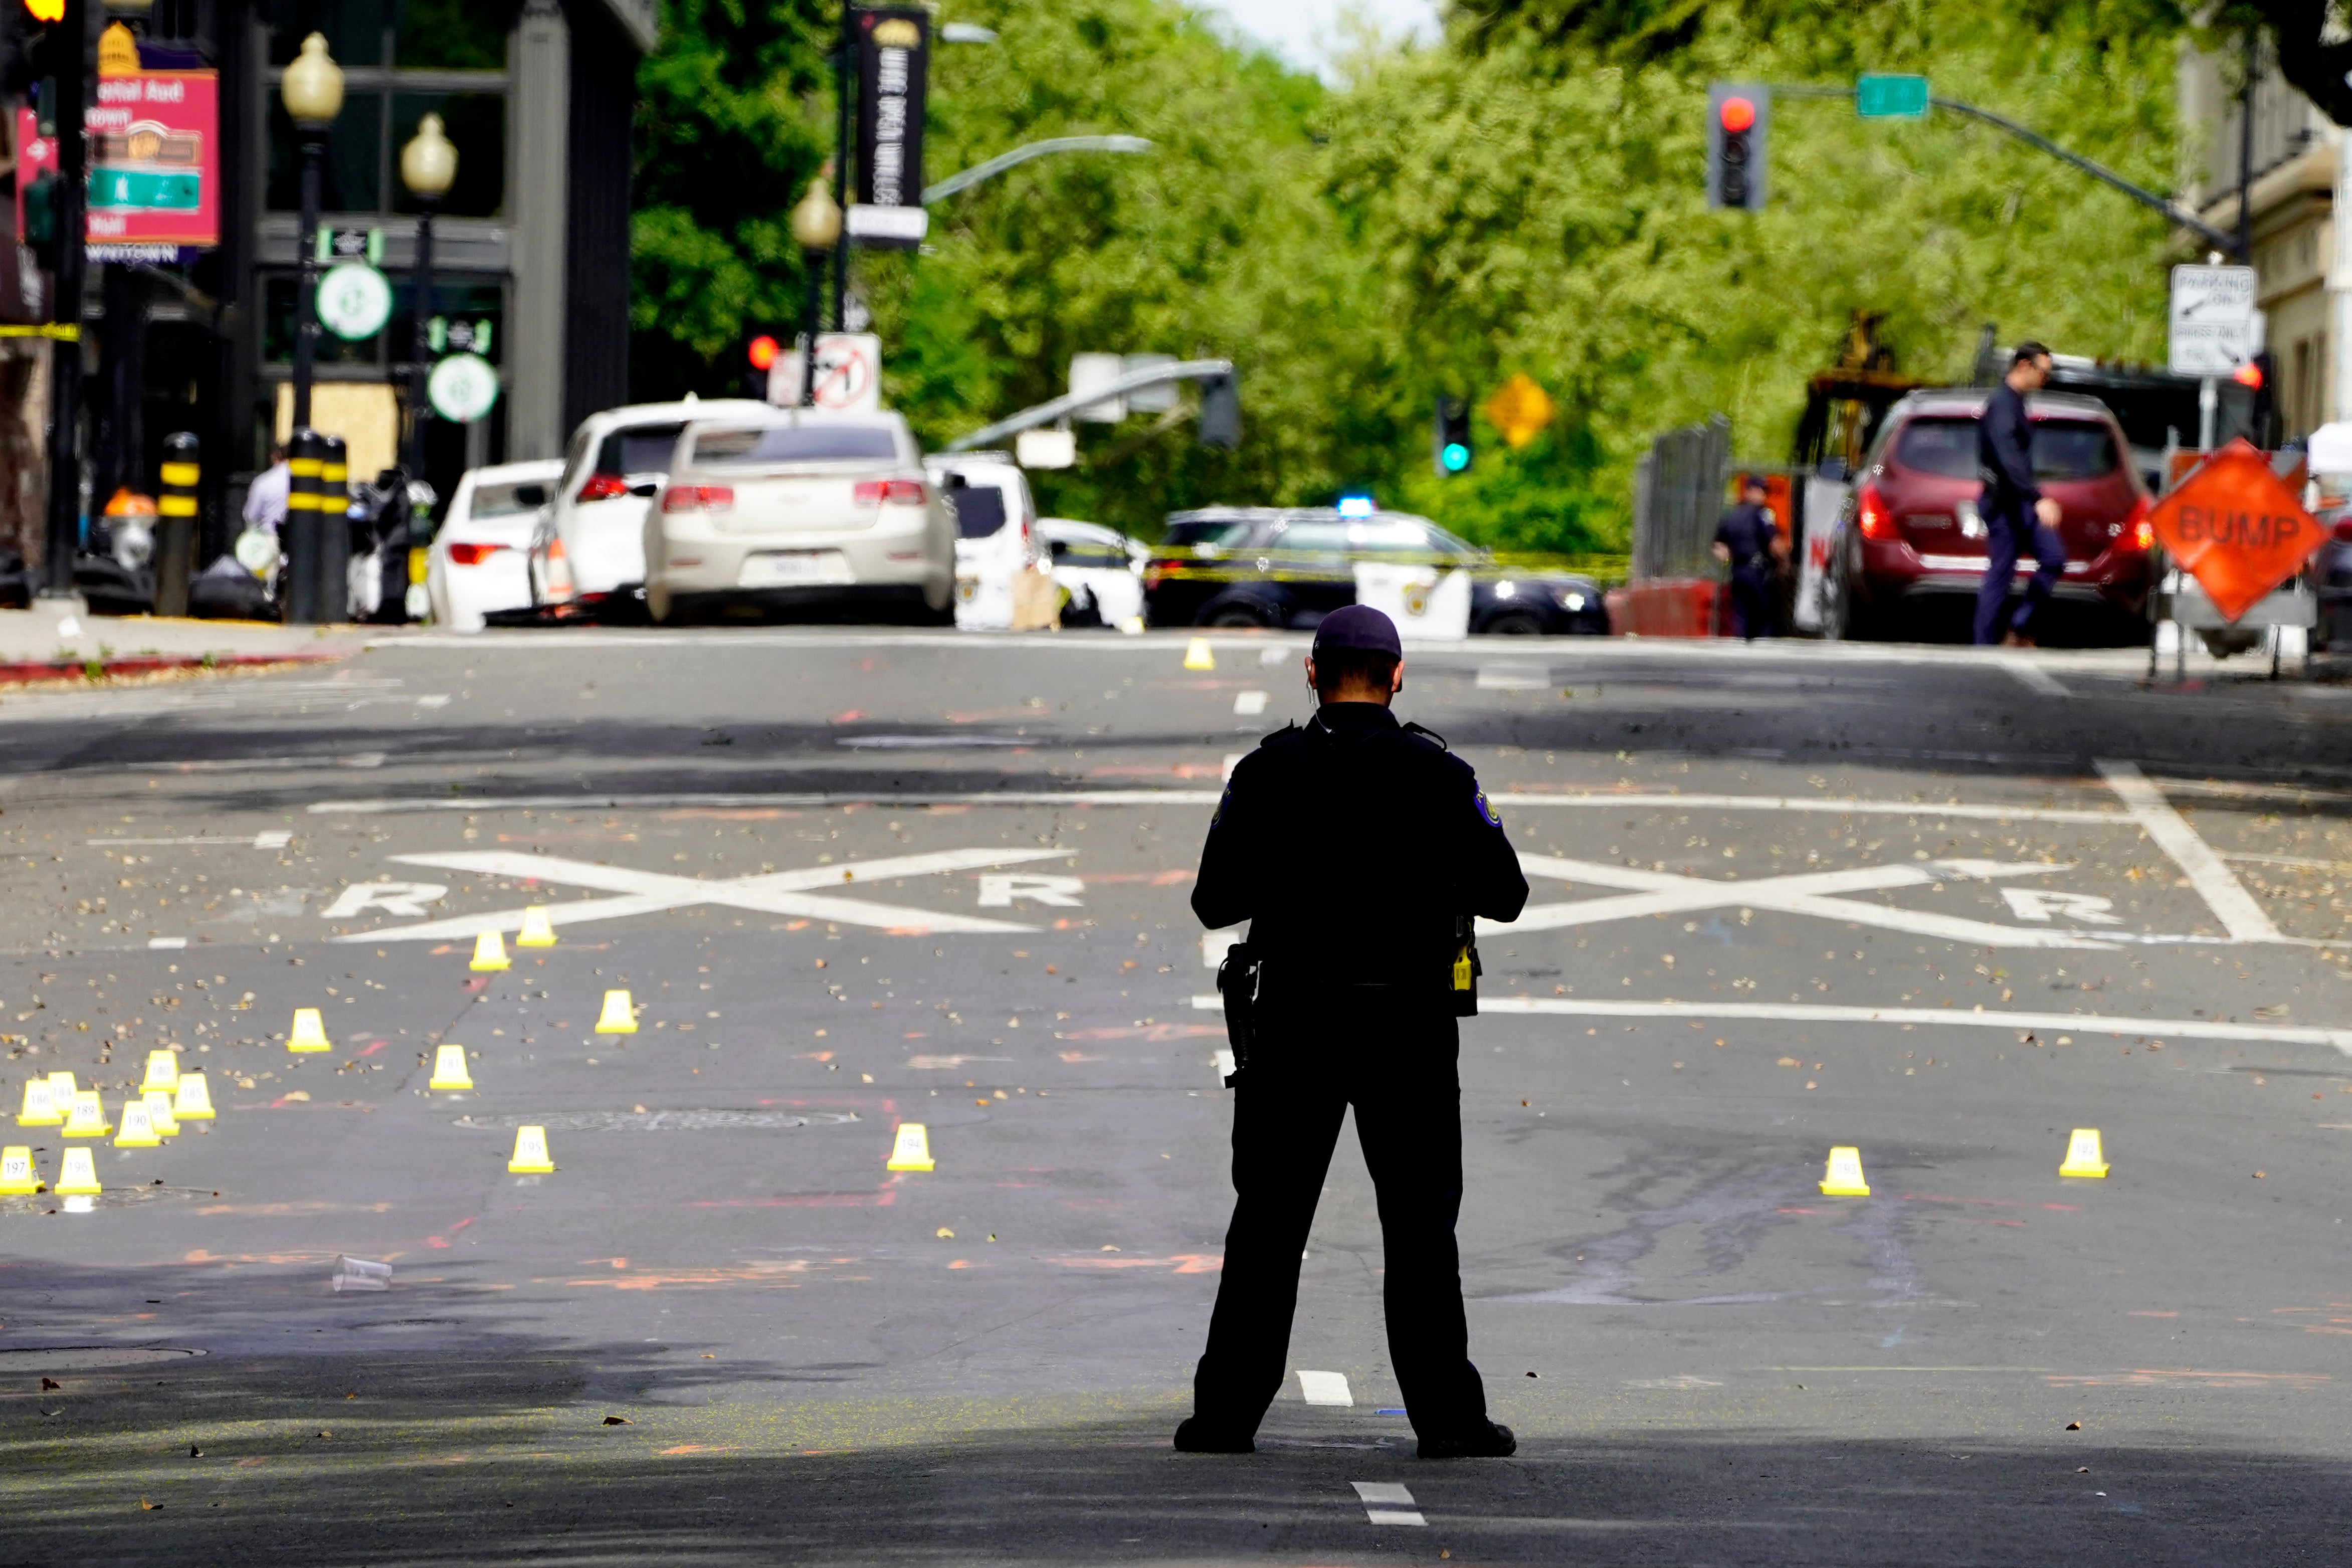 A Sacramento City Police Officer stands near a field of evidence markers after a mass shooting In Sacramento, California on 3 April